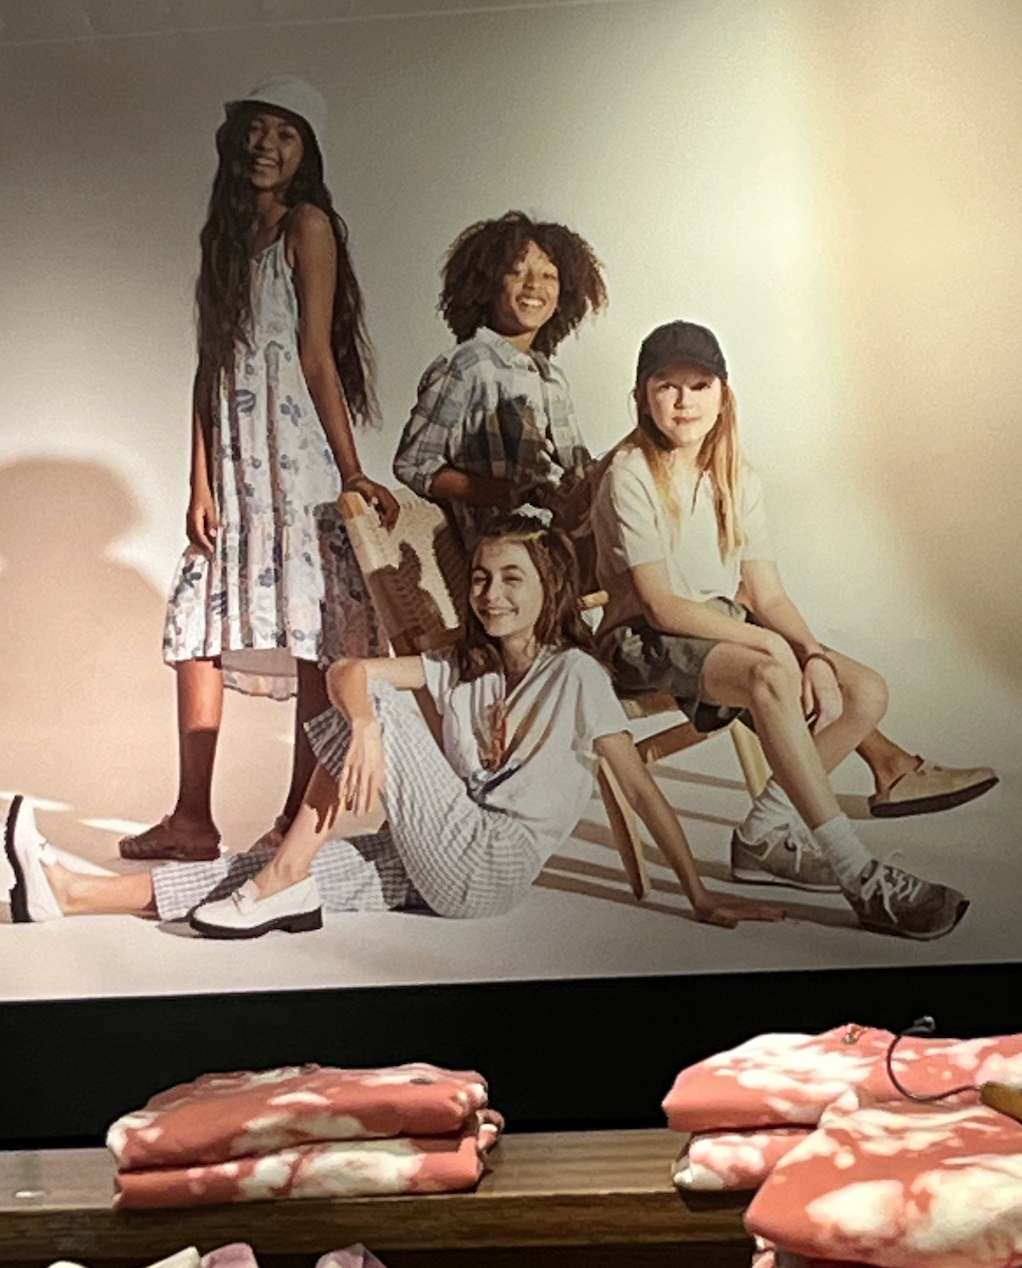 A group of smiling kids sit or stand together in a photo behind some folded clothes on a display